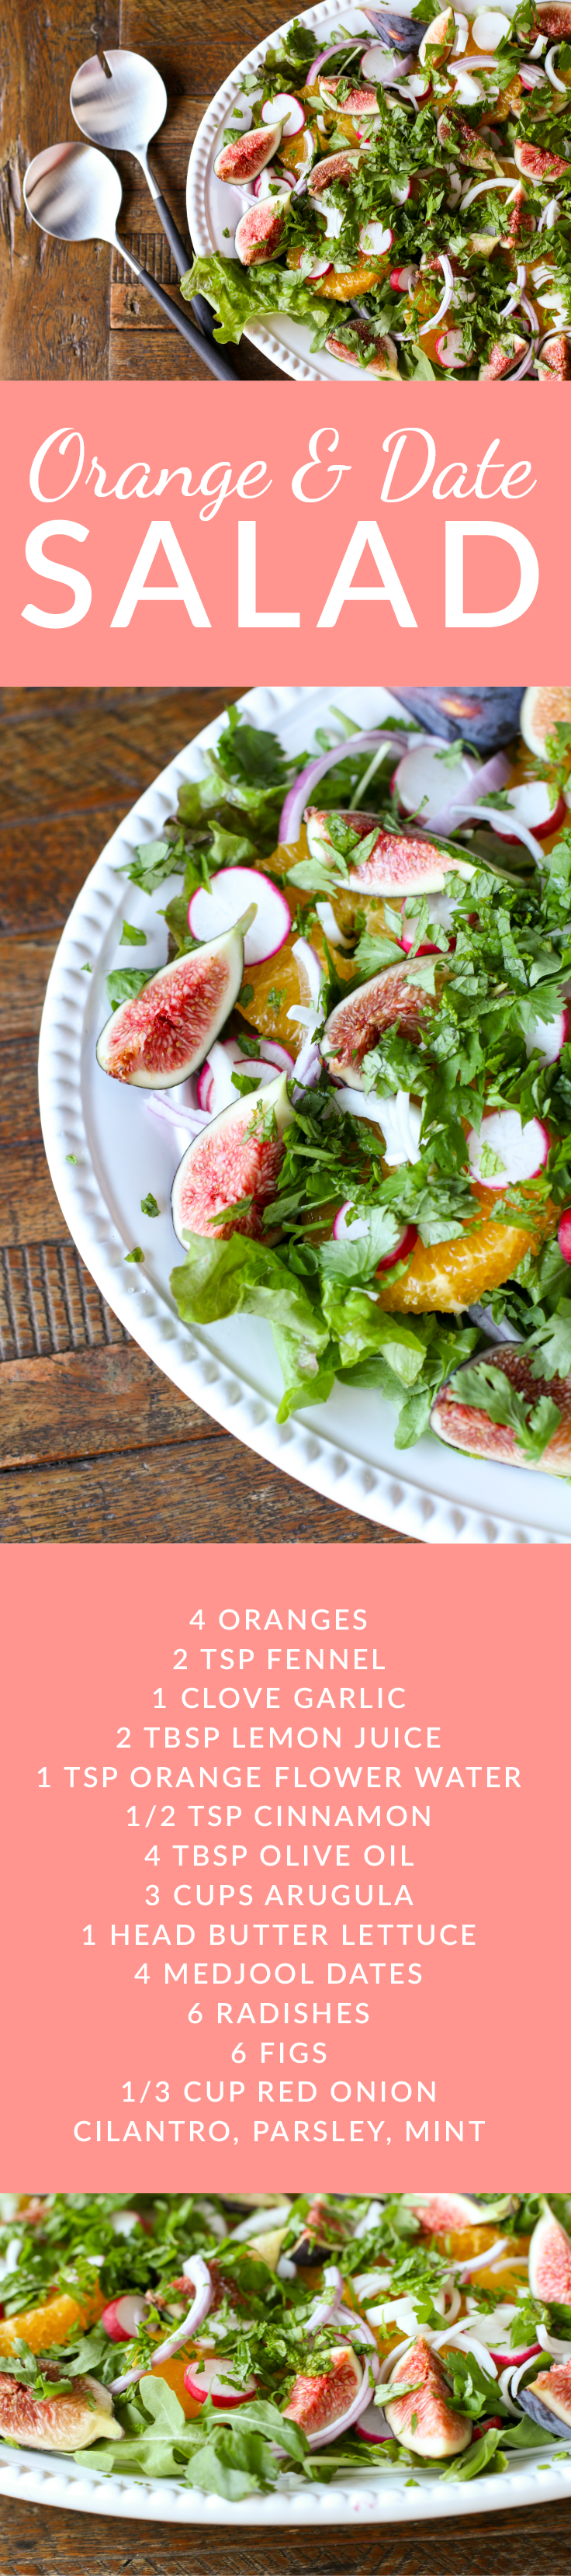 This beautiful orange and date Ottolenghi salad is bursting with complimentary sweet, sour & bitter flavors. Add fresh figs to take it right over the top.